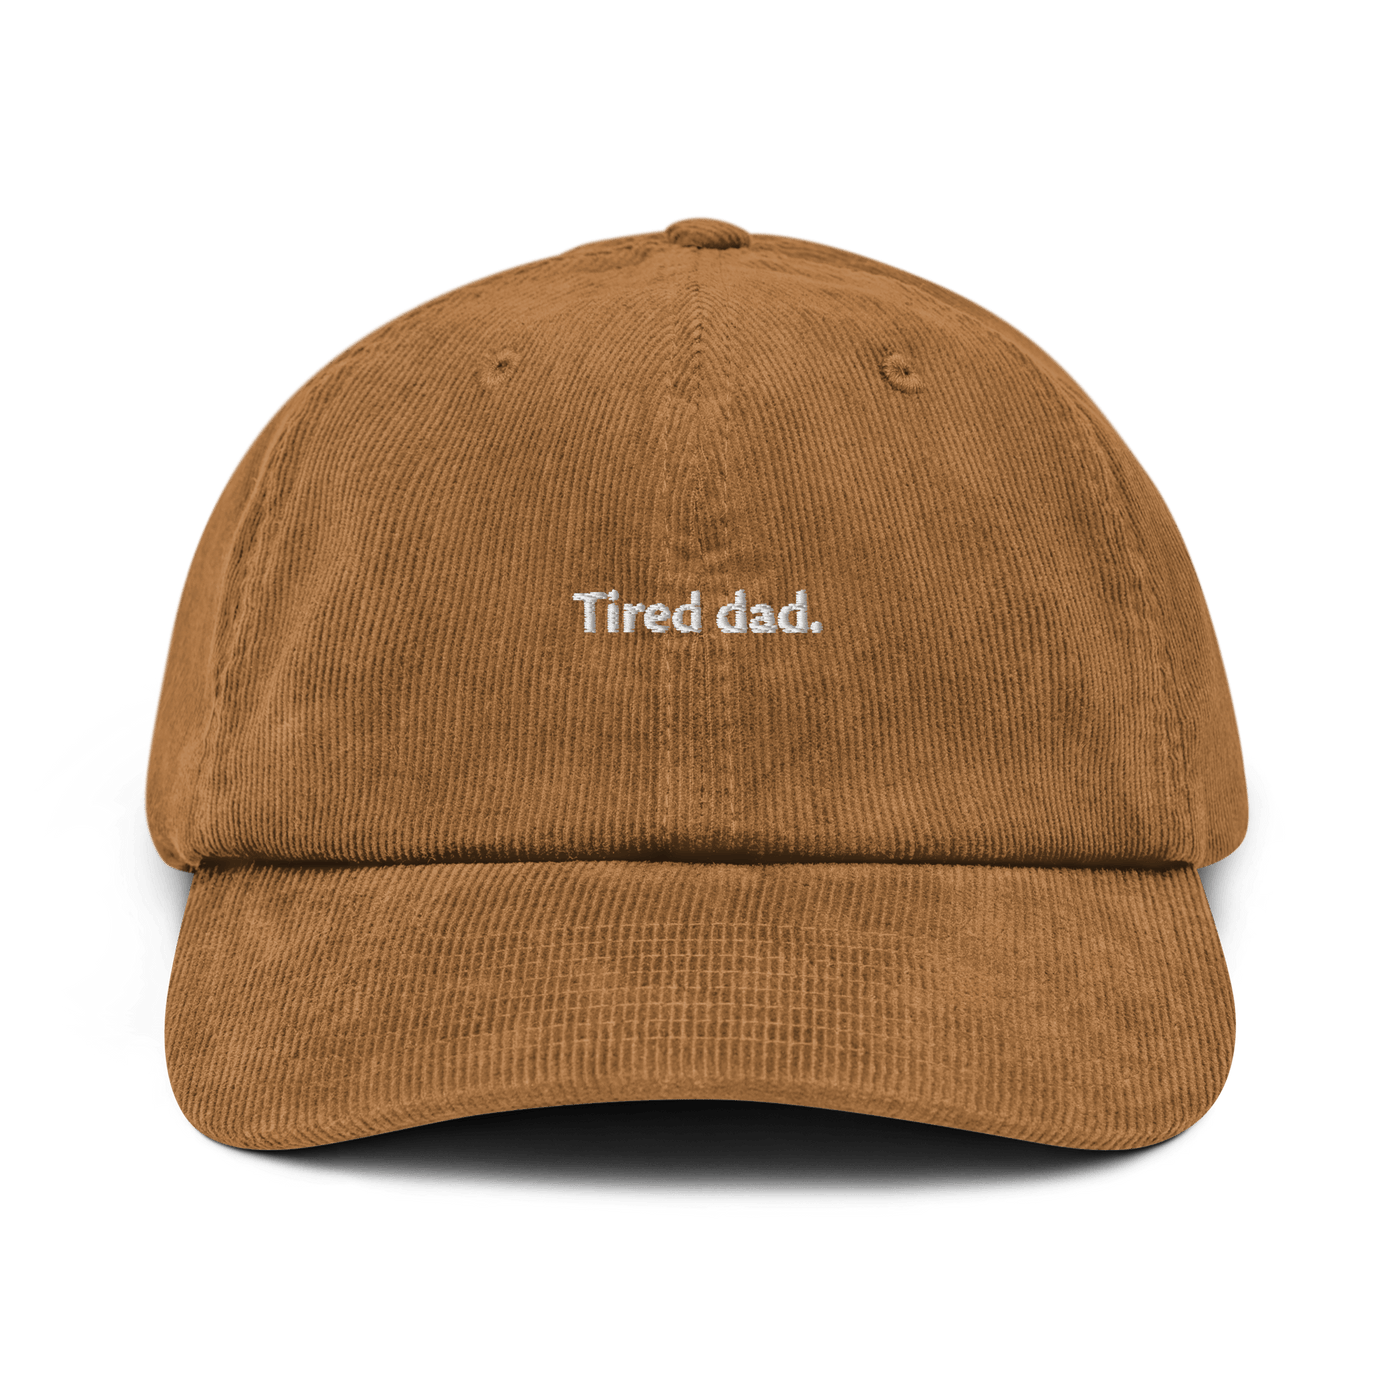 Tired dad Corduroy hat - Camel - - Just Another Cap Store